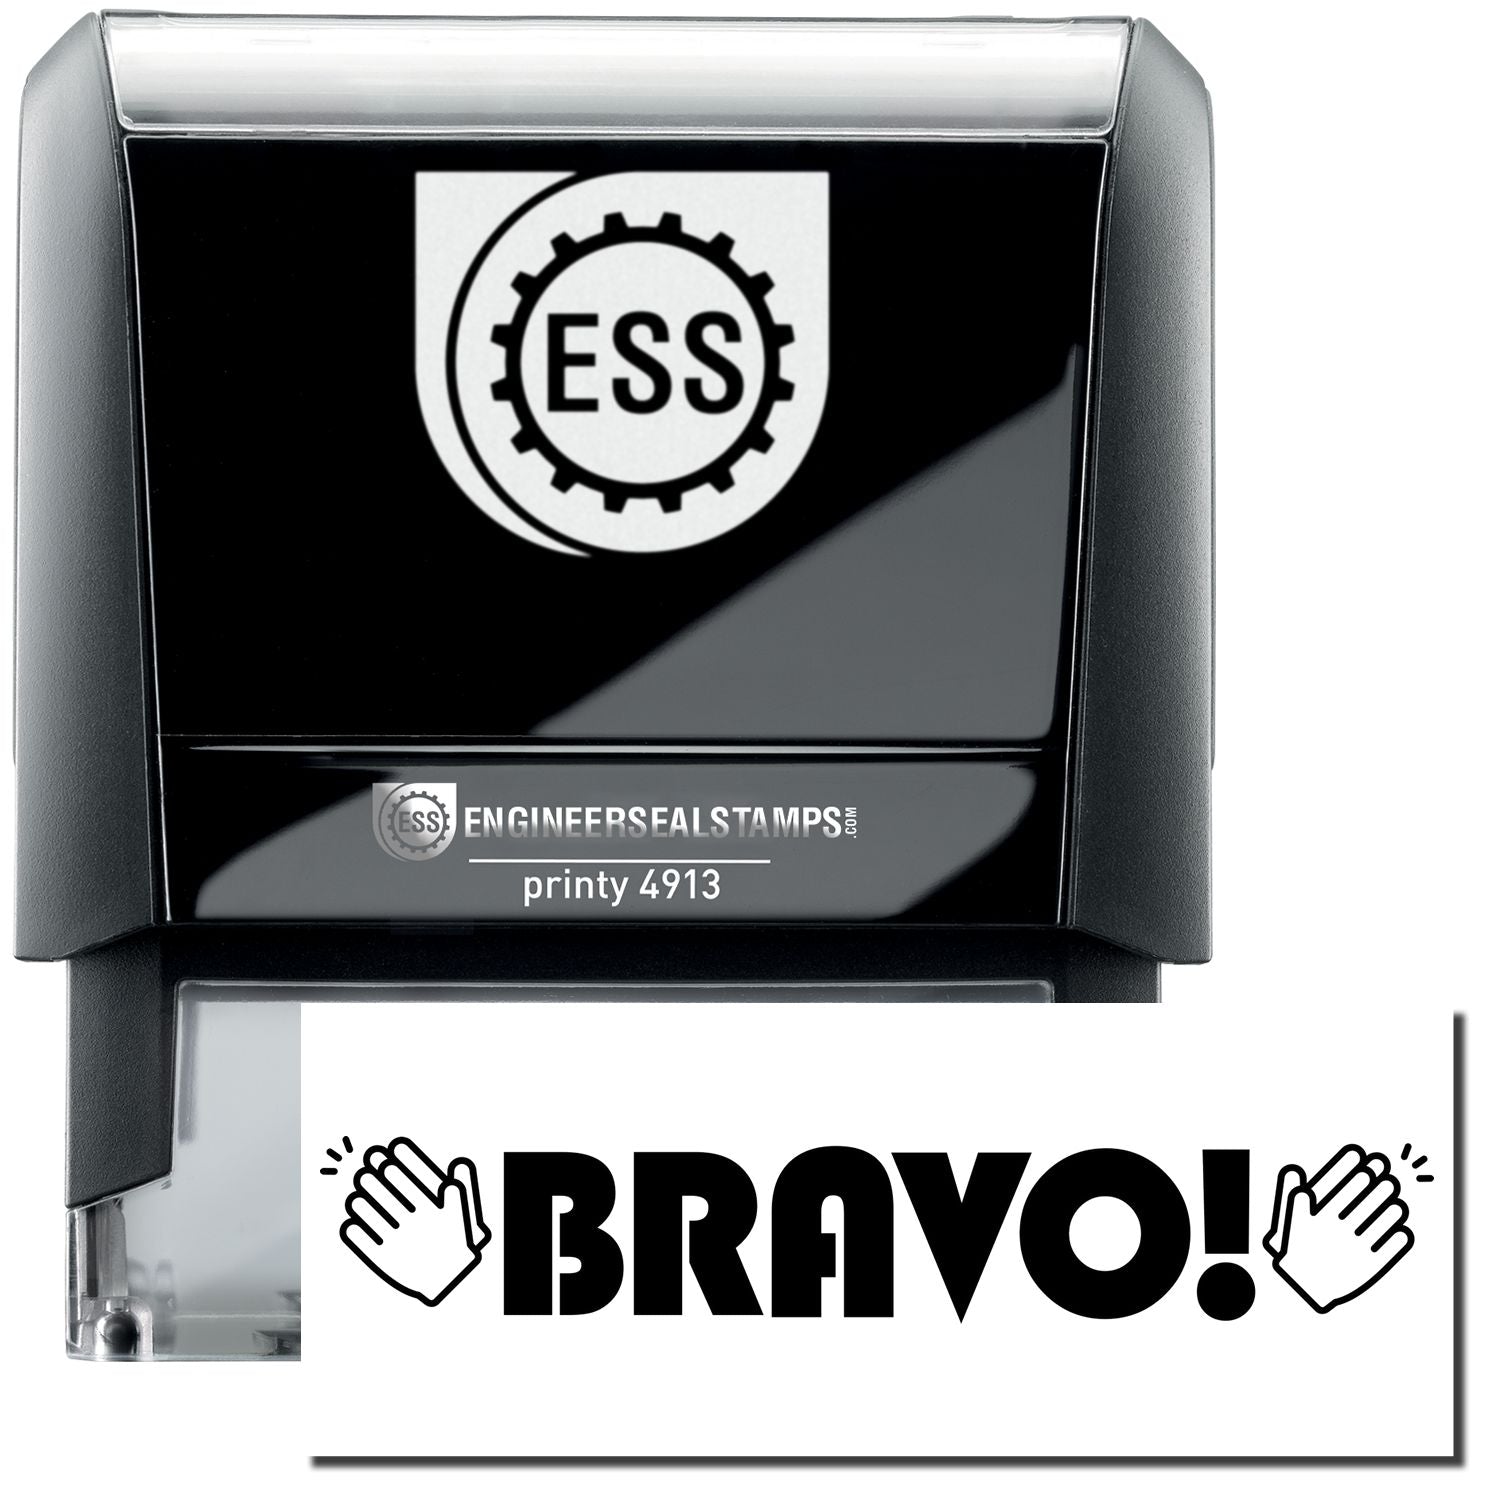 A self-inking stamp with a stamped image showing how the text "BRAVO!" in a large unique bold font with clapping Hands on both left and the right side of the text is displayed after stamping.